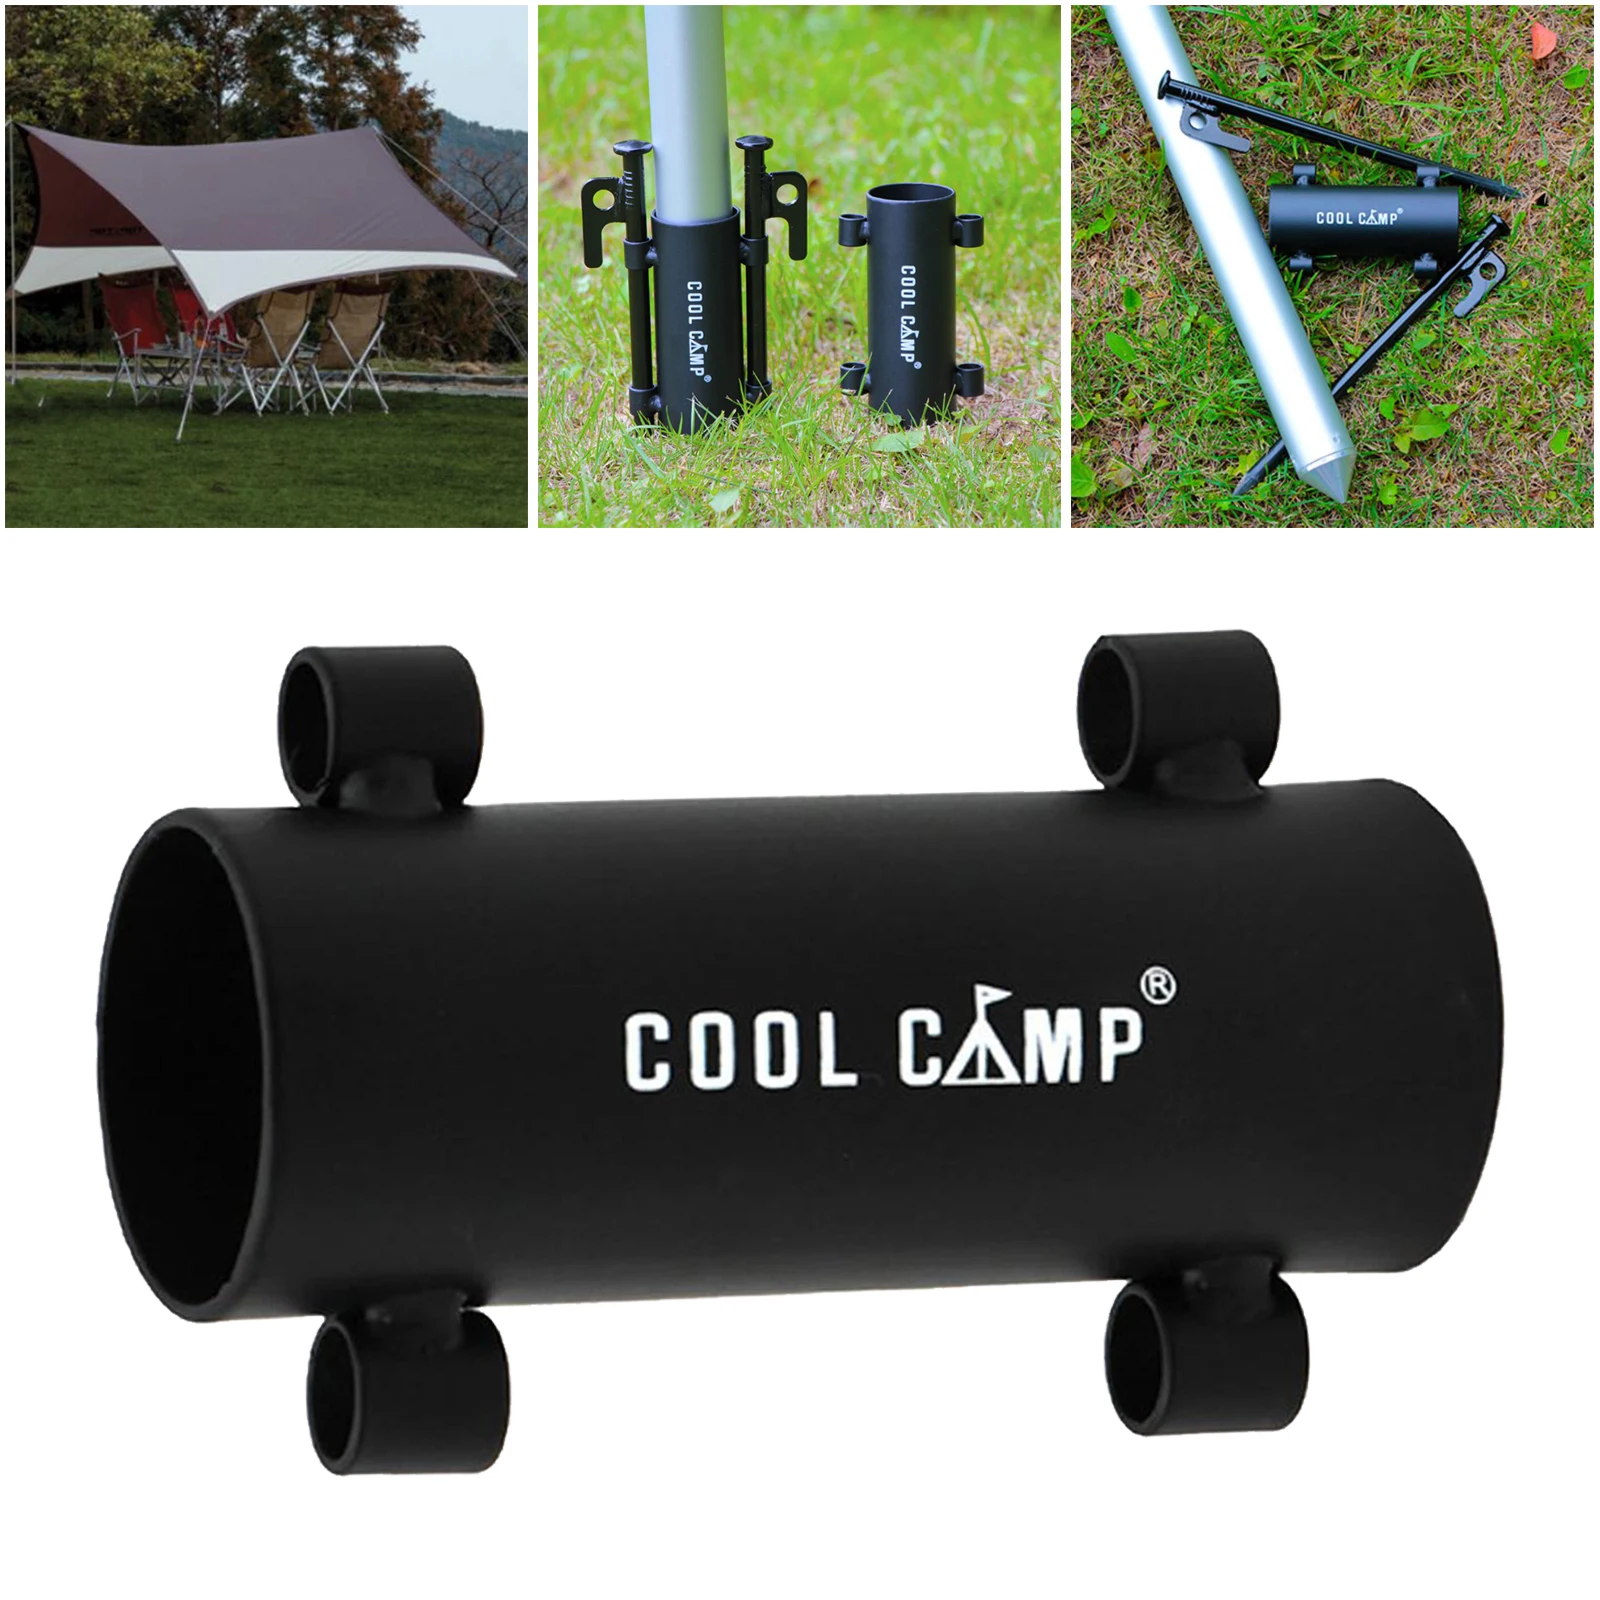 Canopy Pole Holder Practical Travel Awning Rod Support Stand Outdoor Camping